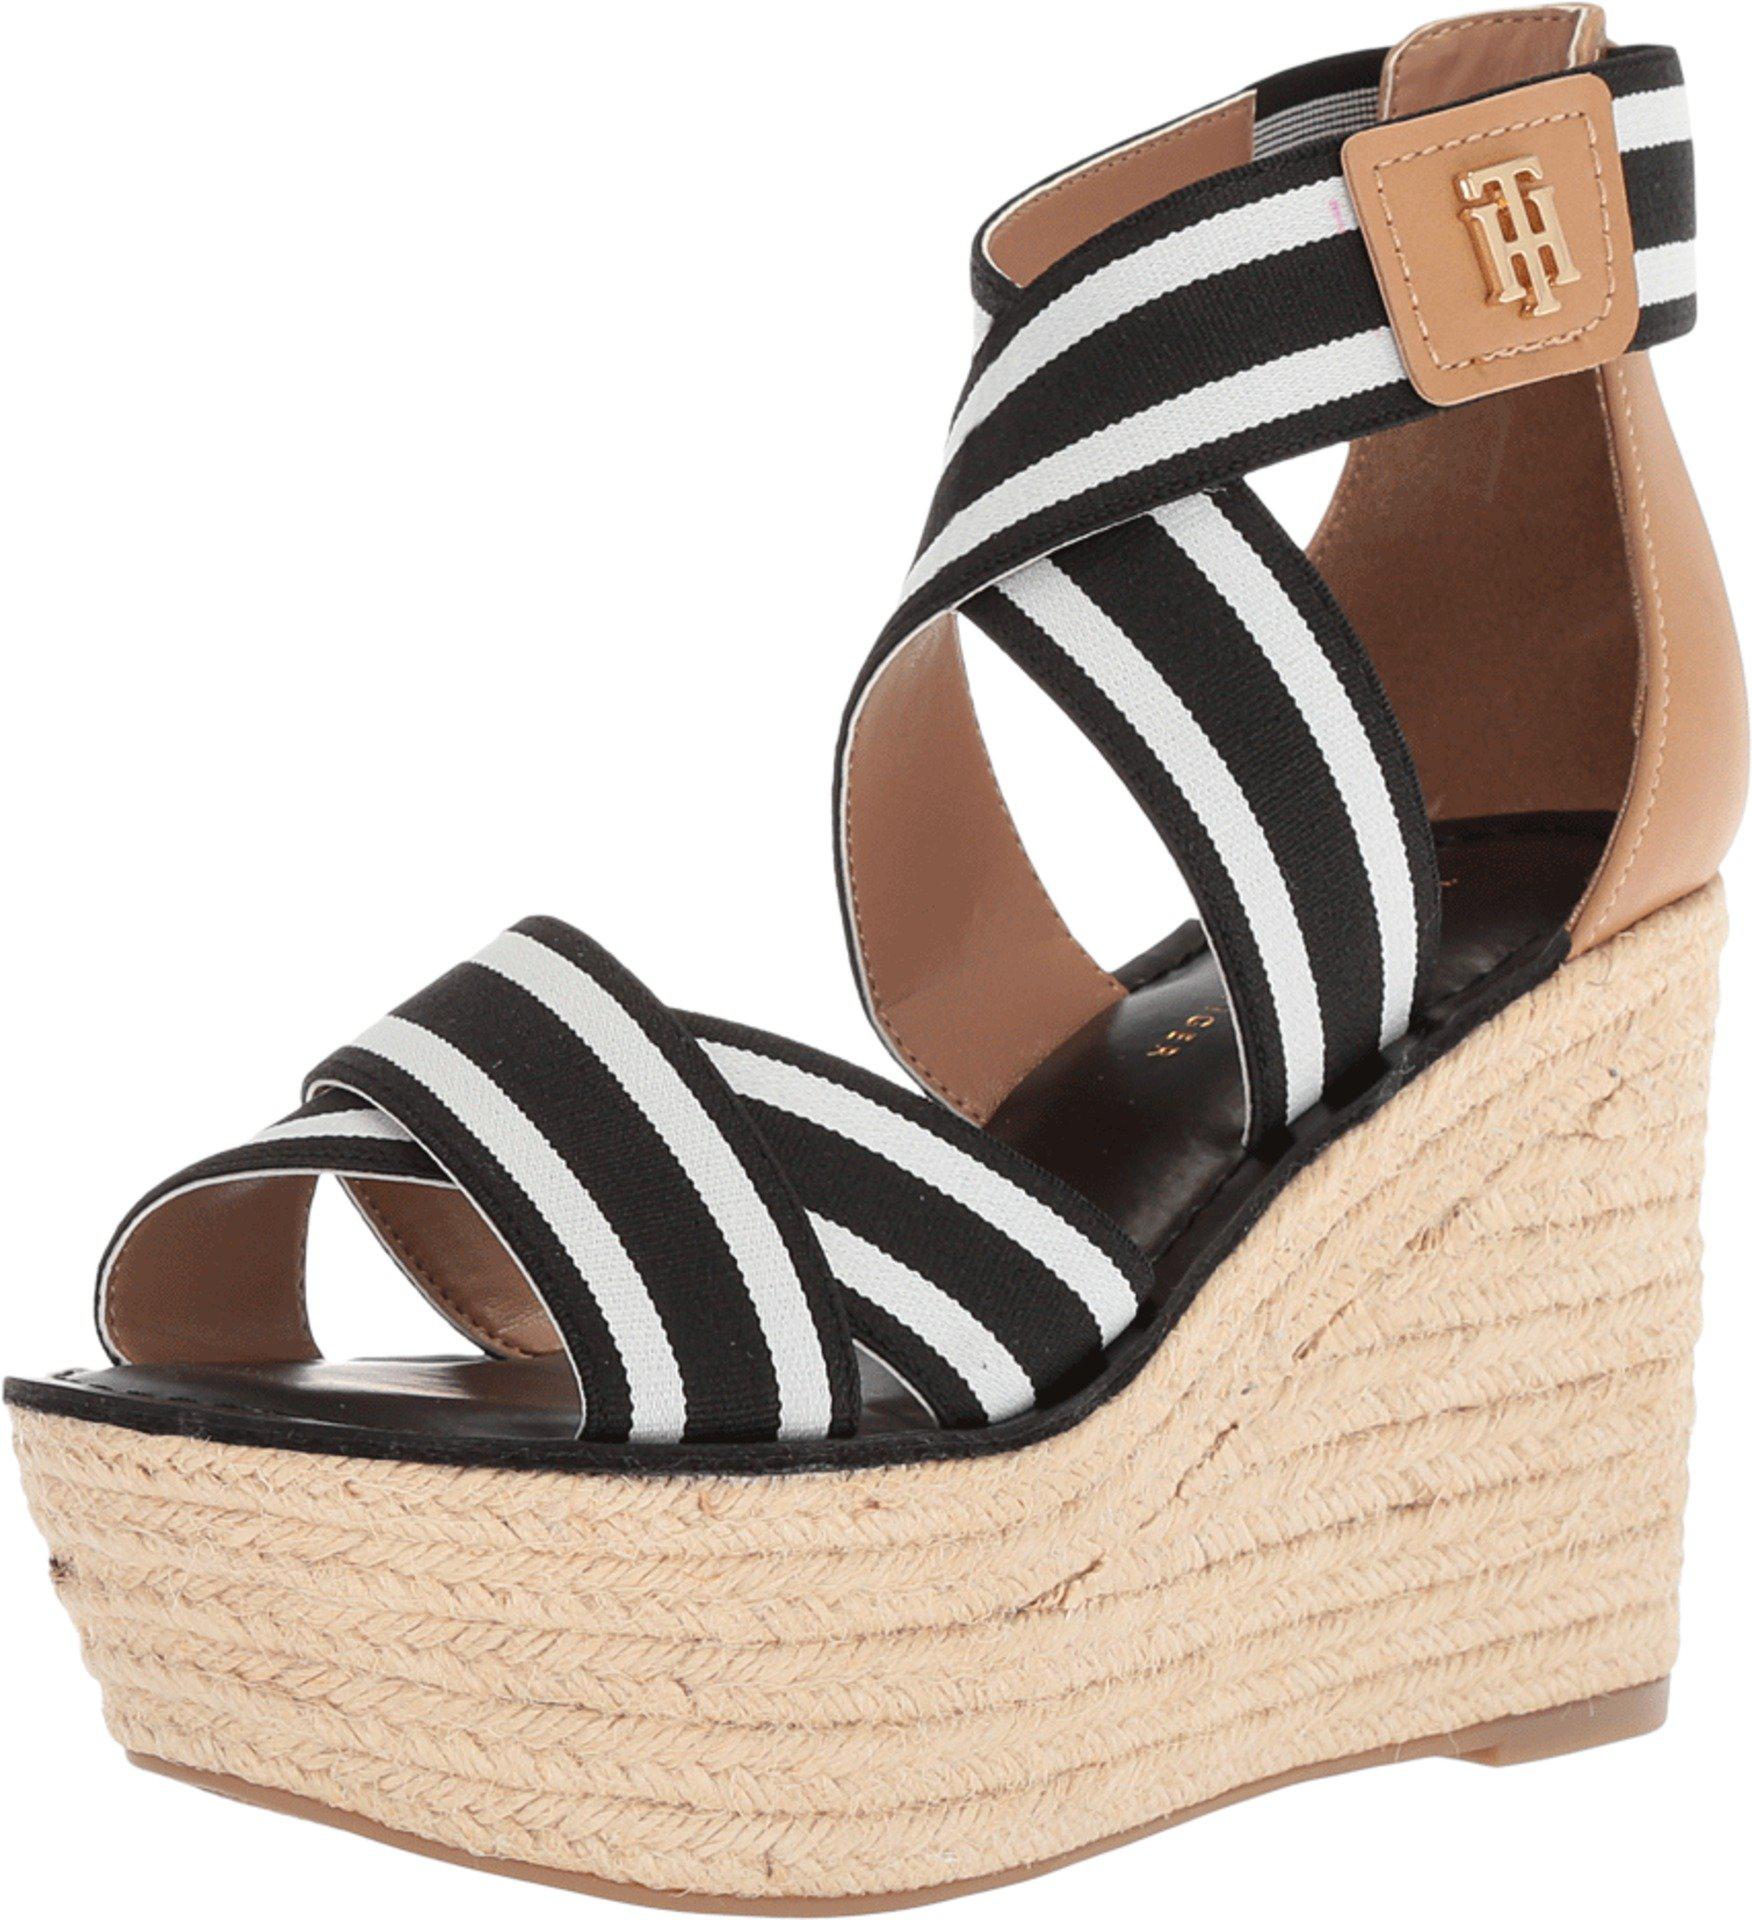 Tommy Hilfiger Synthetic Theia Espadrille Wedge Sandal in Black/White - Lyst